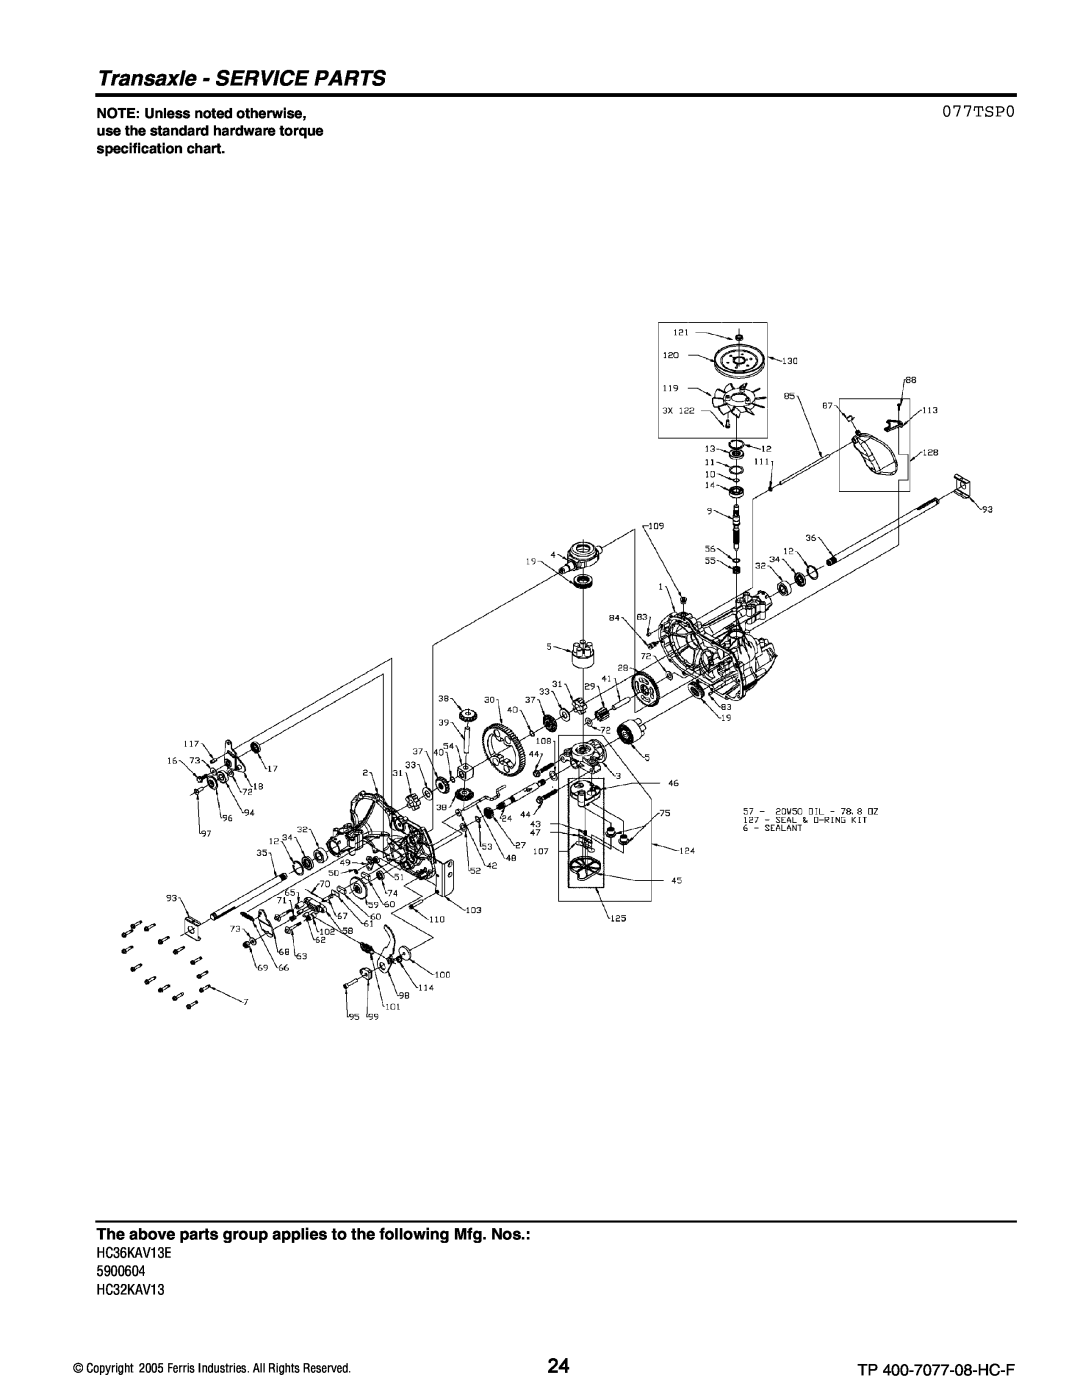 Ferris Industries HC32KAV13, HC36KAV13E manual Transaxle - SERVICE PARTS, 077TSP0, NOTE Unless noted otherwise 